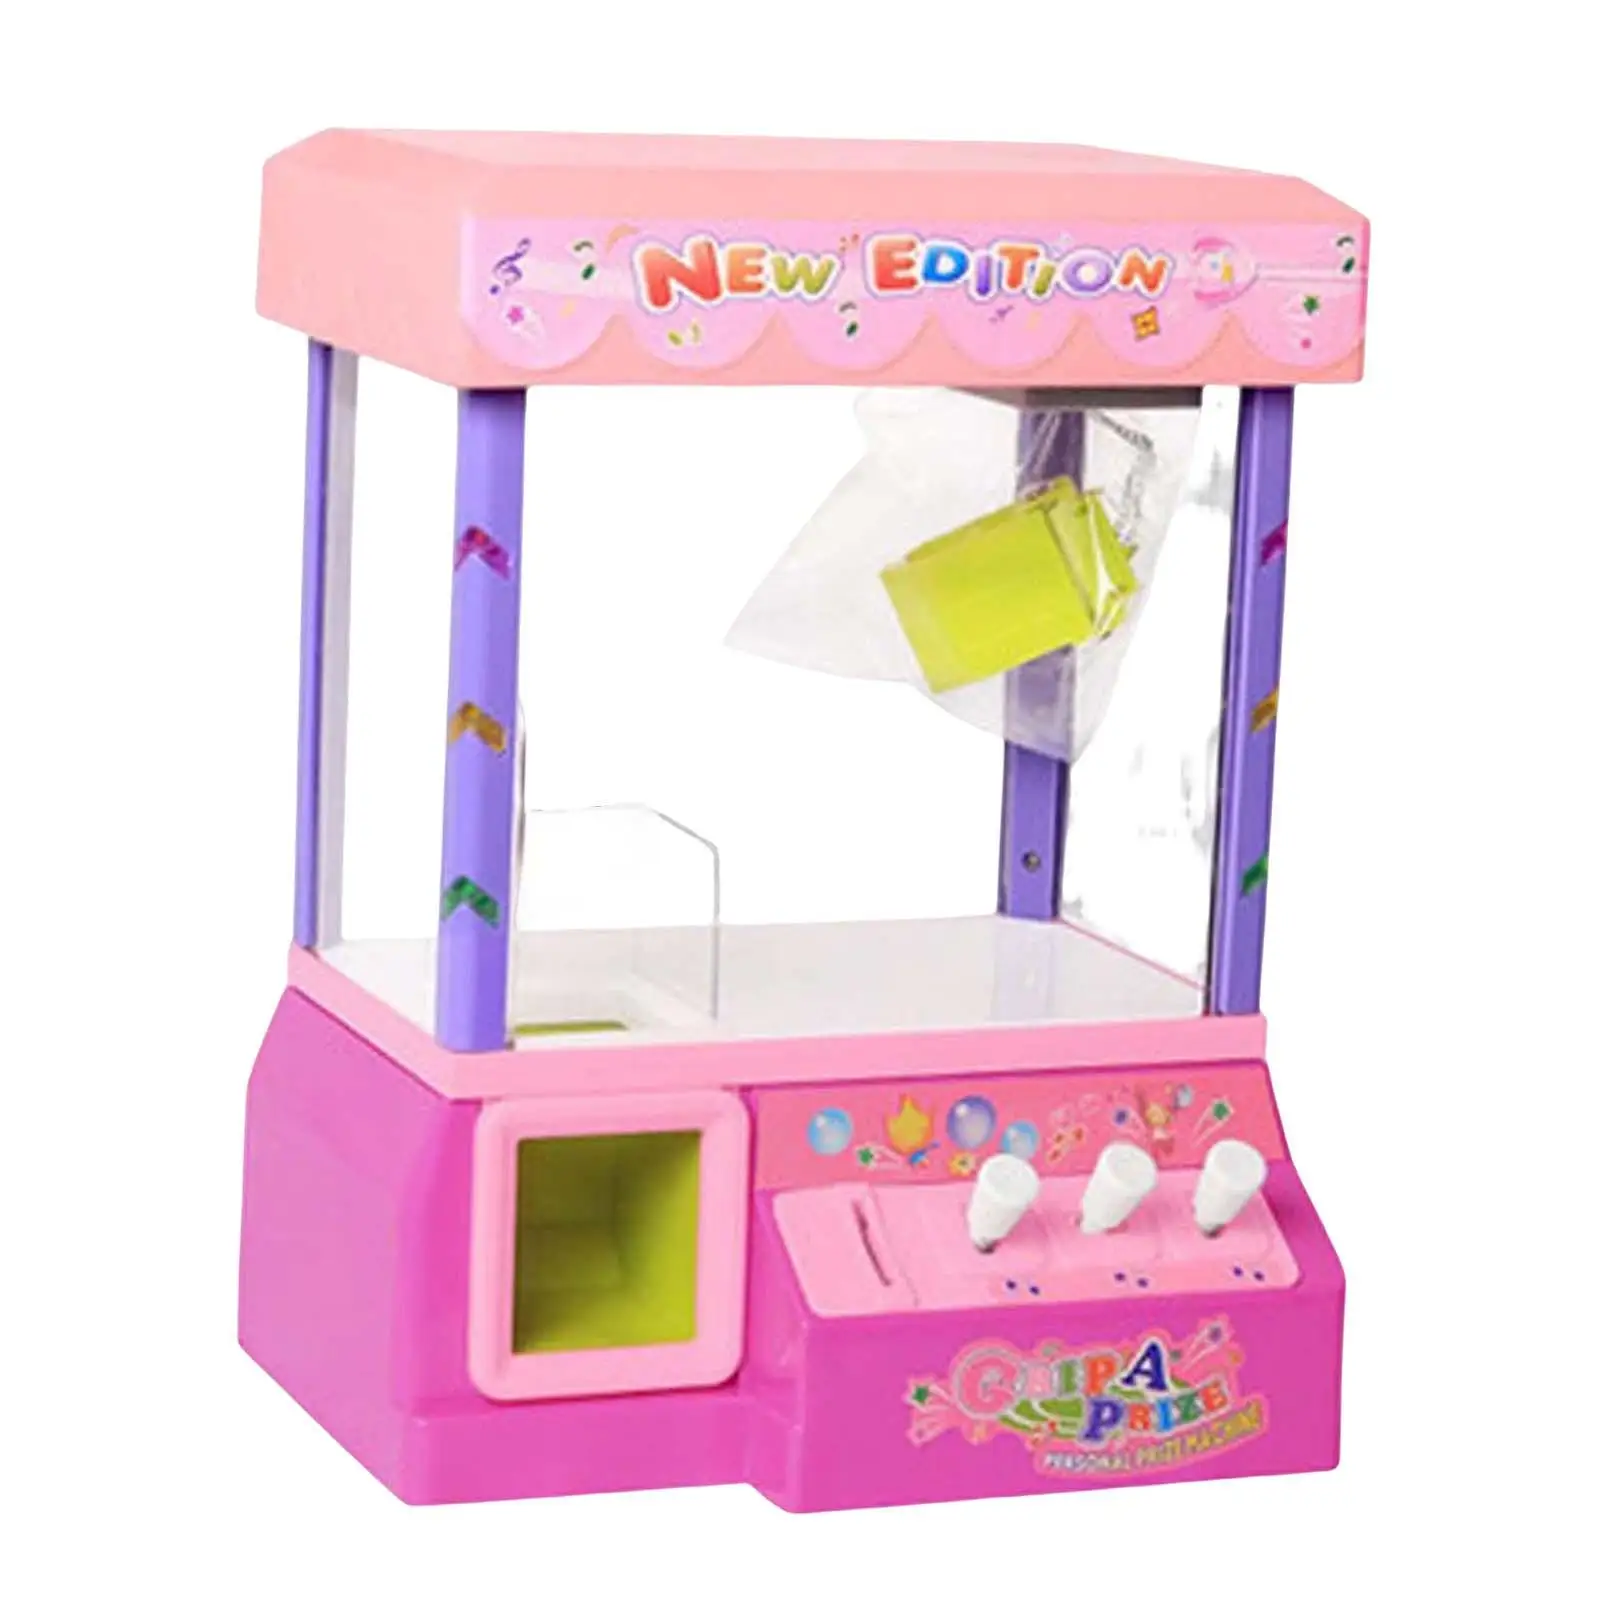 Mini Dolls Machine Toys Mini Claw Catch Toy Powerful Gripper Birthday Gifts Crane Machines Toy Candy Grabber Entertainment Toy